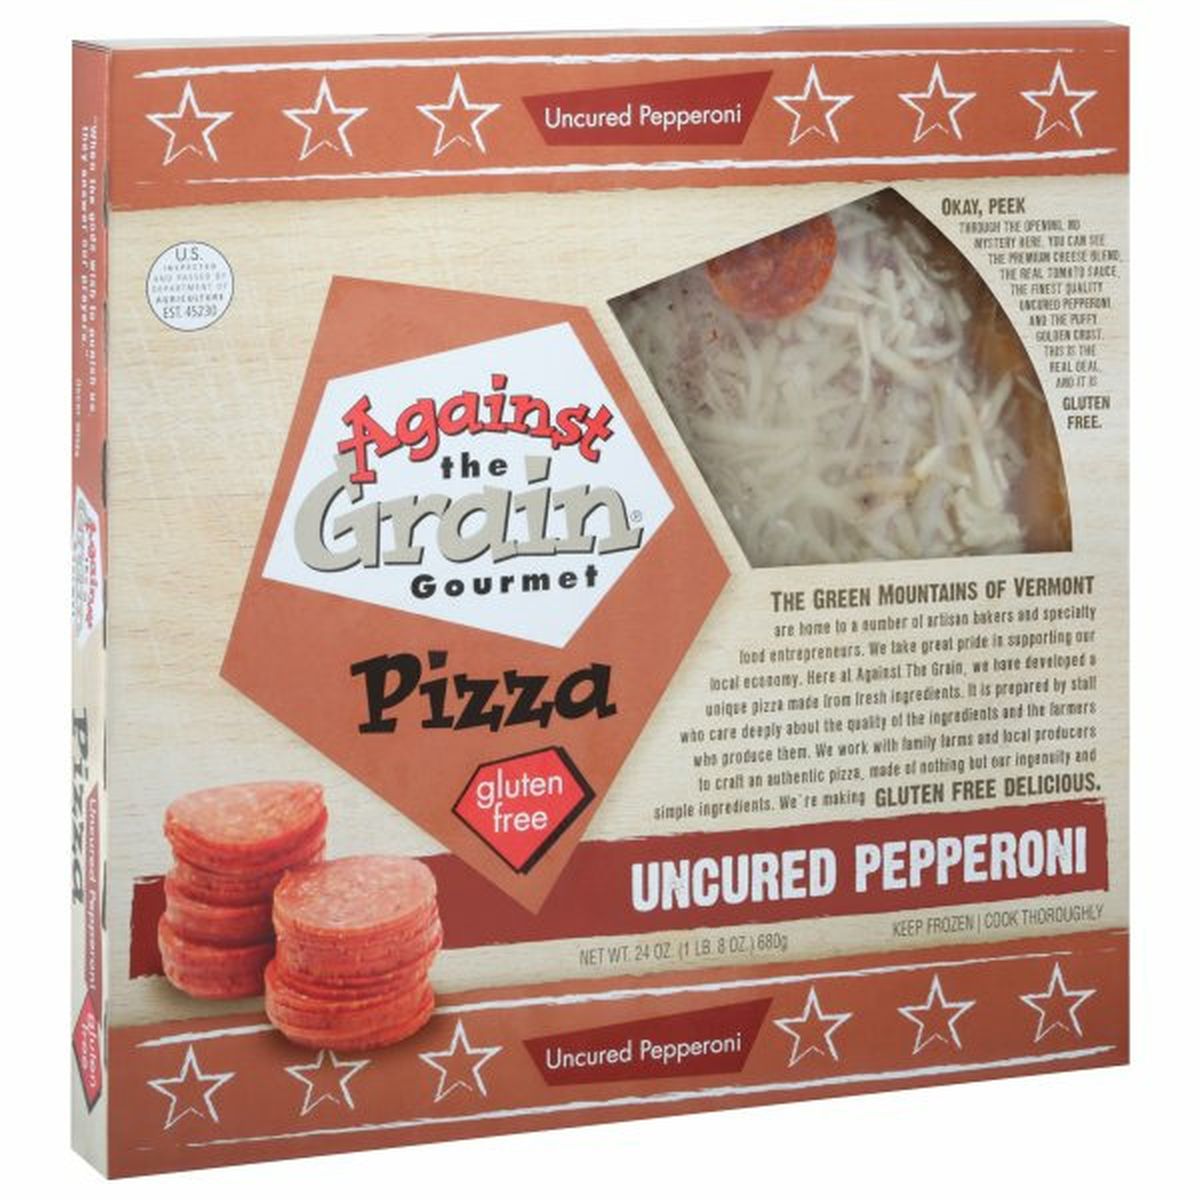 Calories in Against The Grain Gourmet Pizza, Uncured Pepperoni